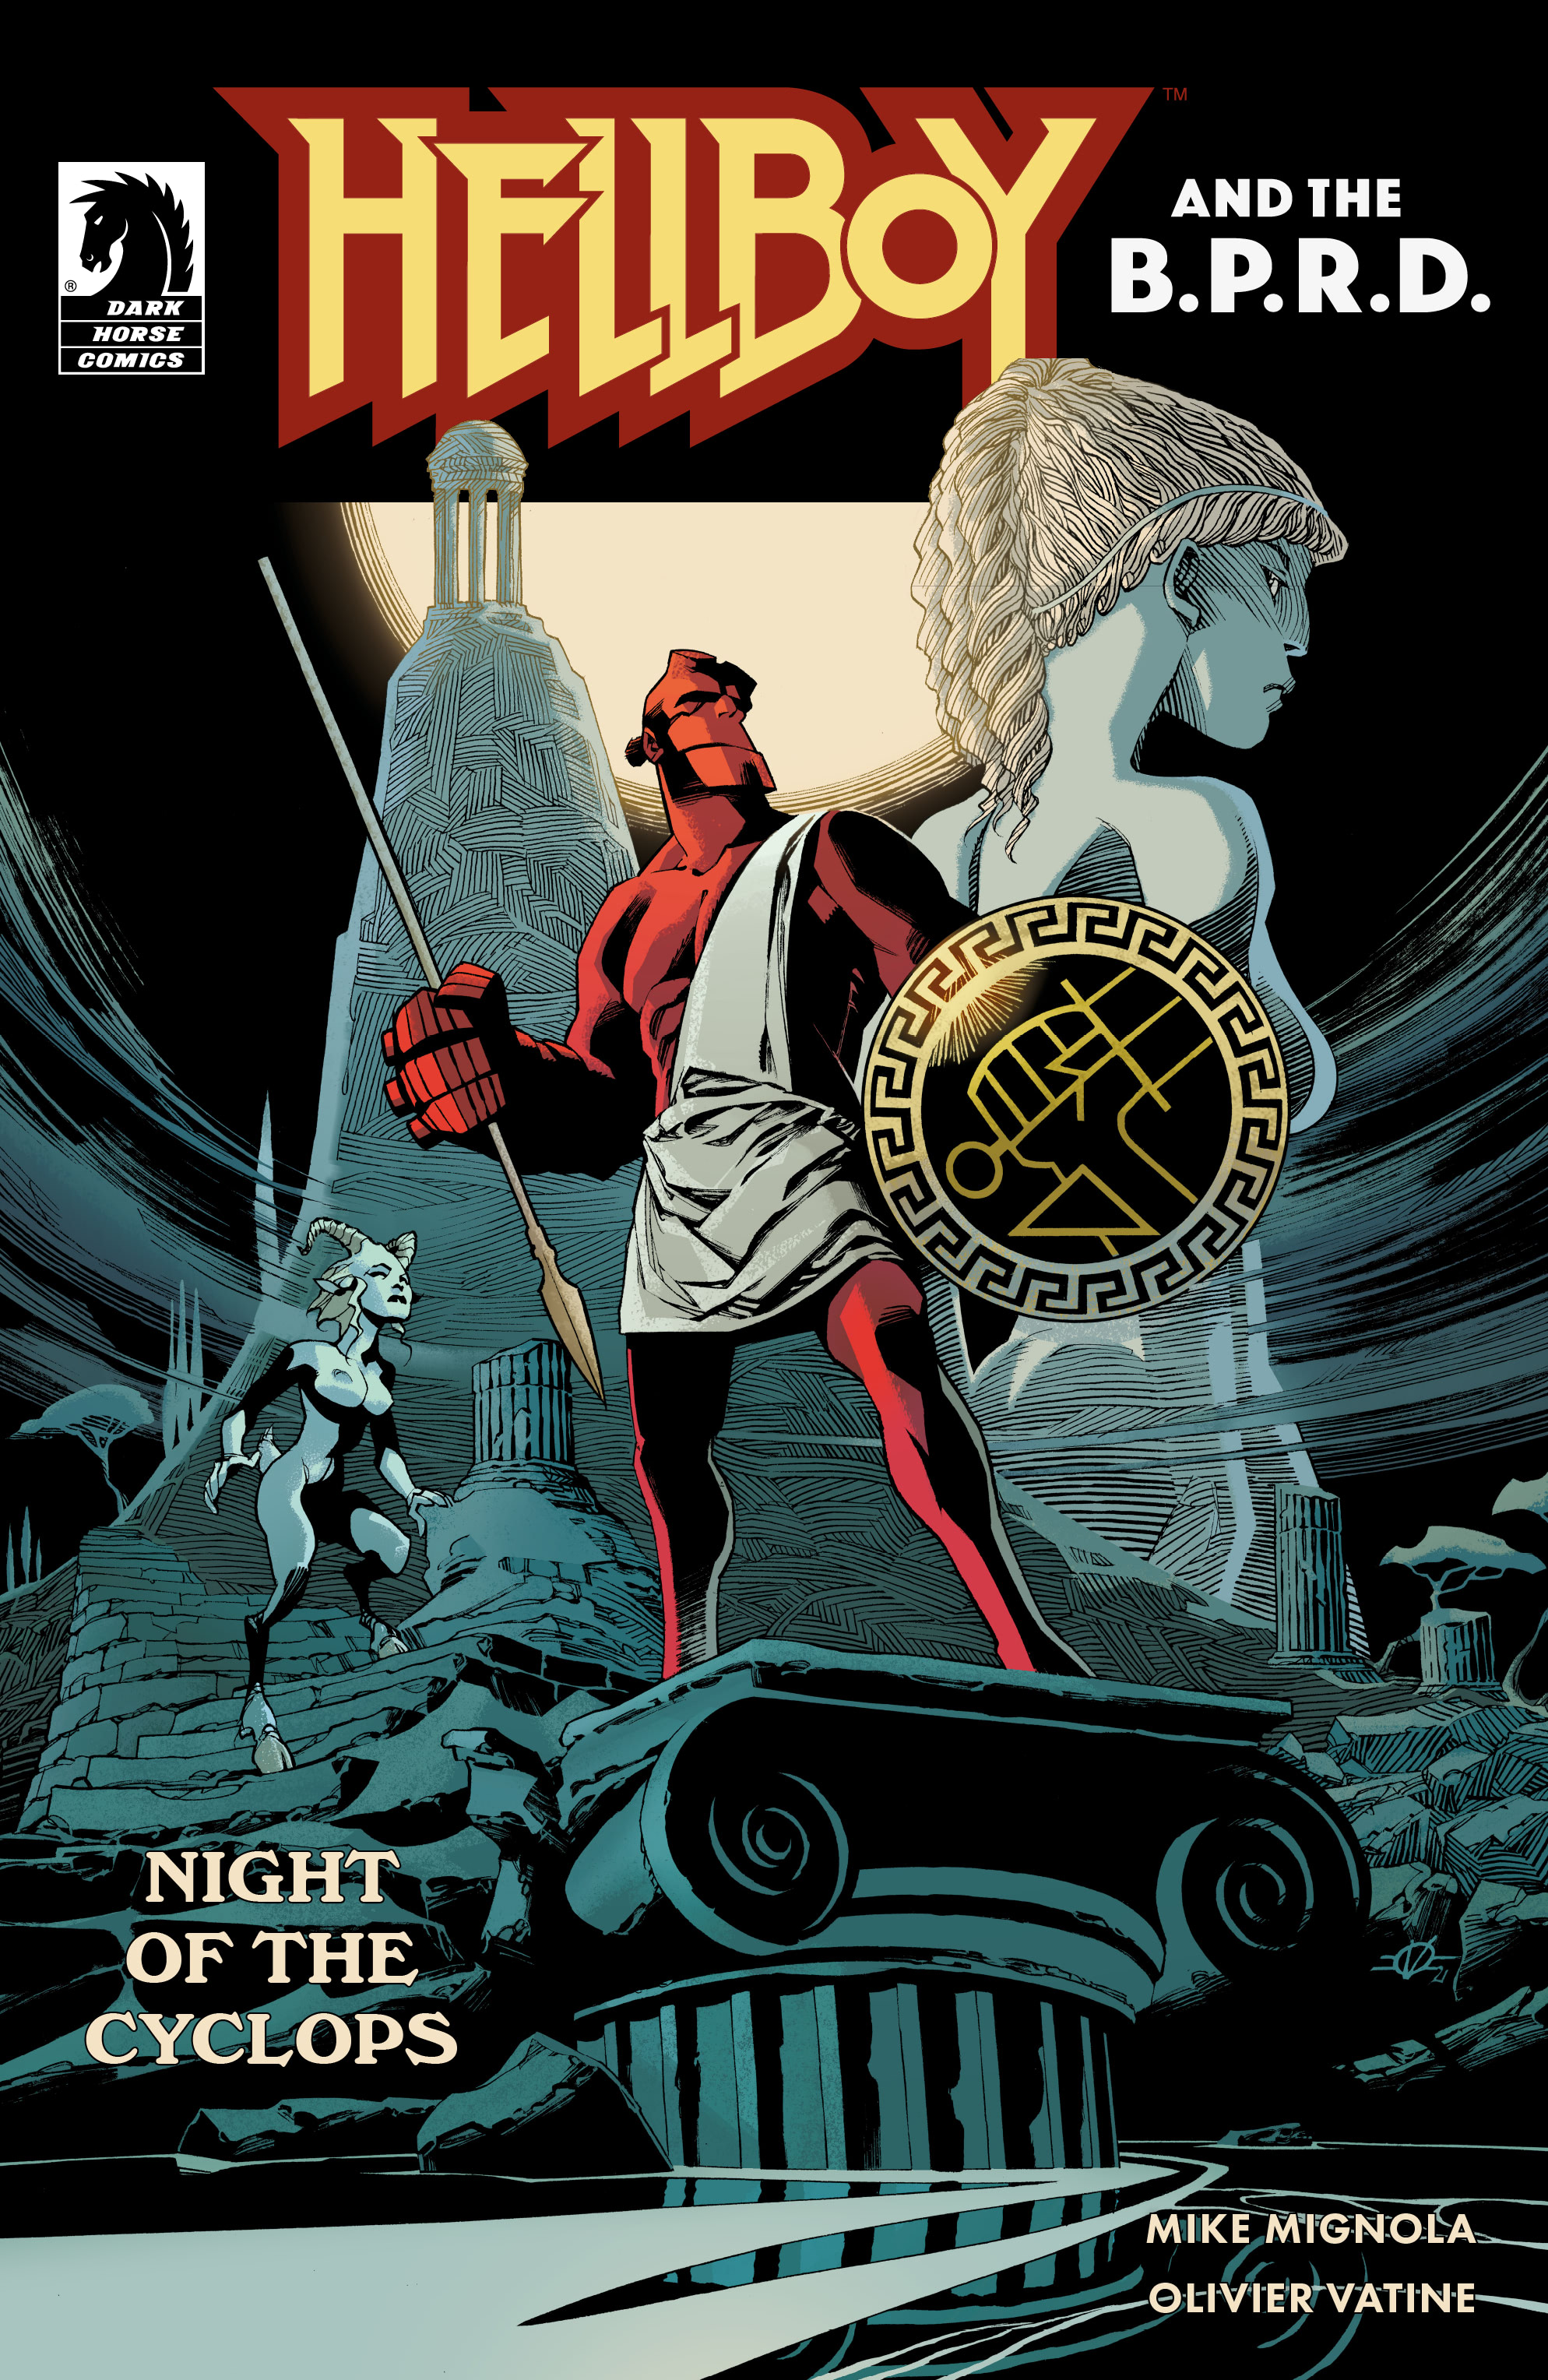 Read online Hellboy and the B.P.R.D.: Night of the Cyclops comic -  Issue # Full - 1